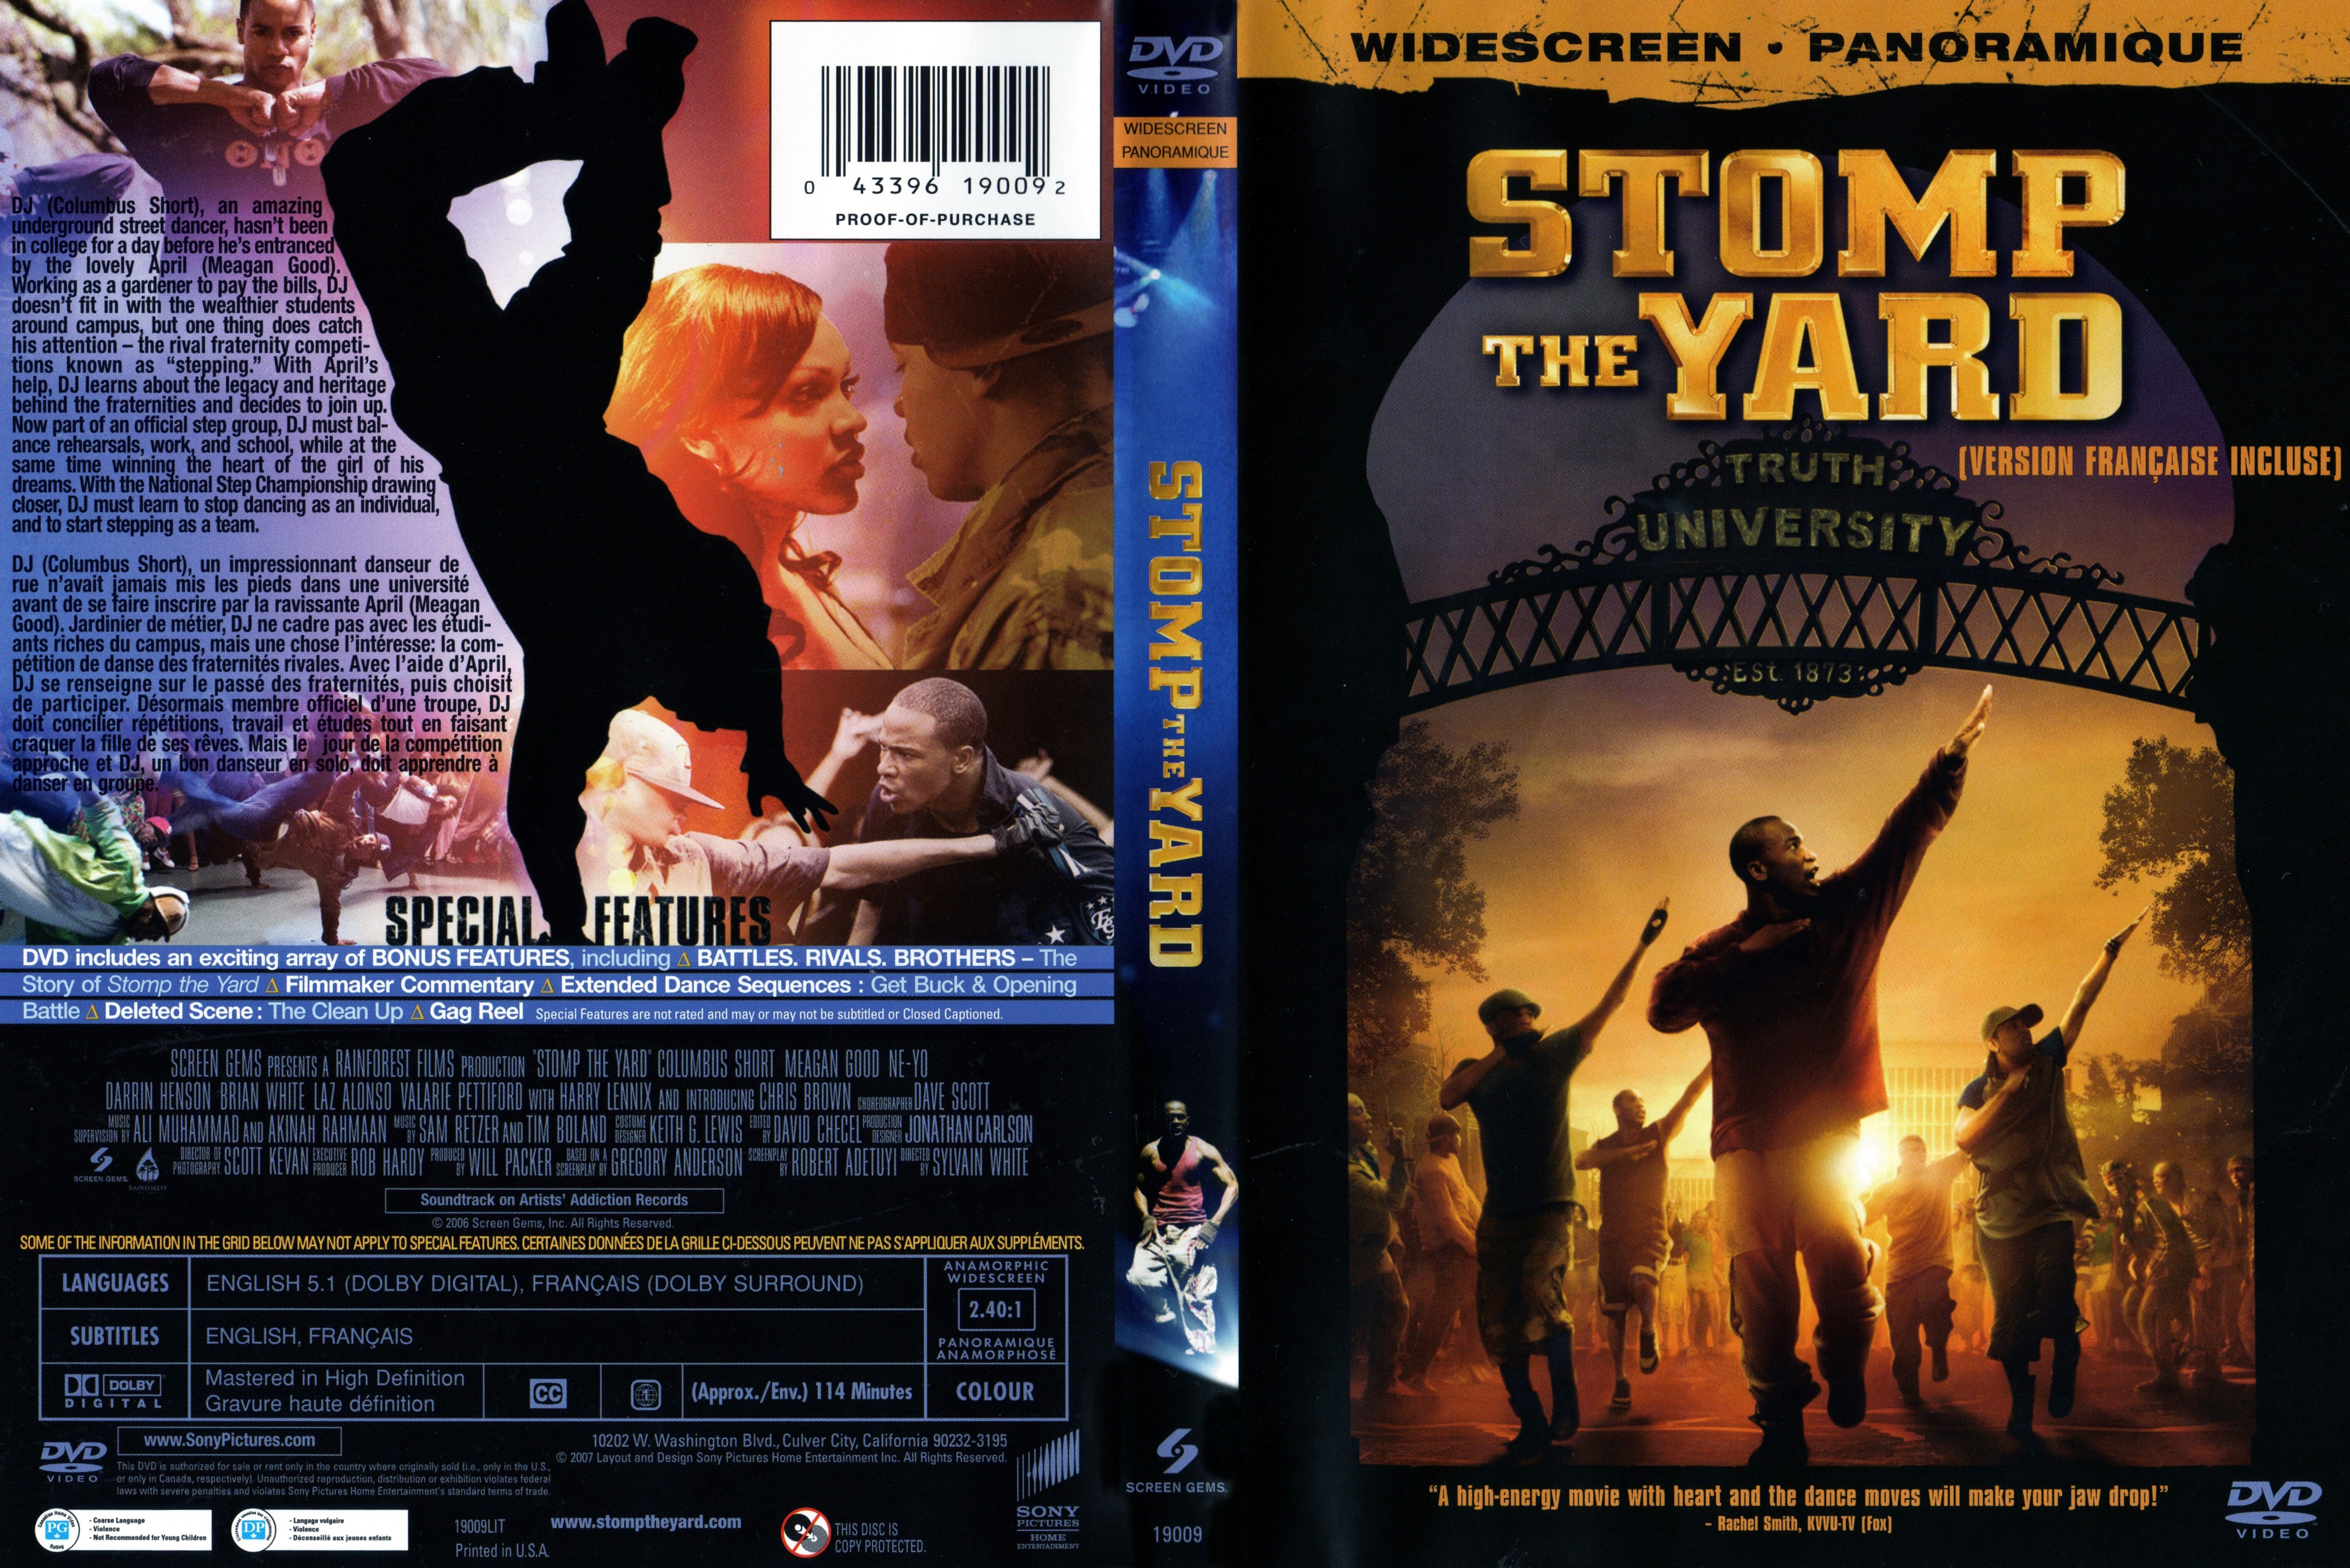 Jaquette DVD Stomp the yard